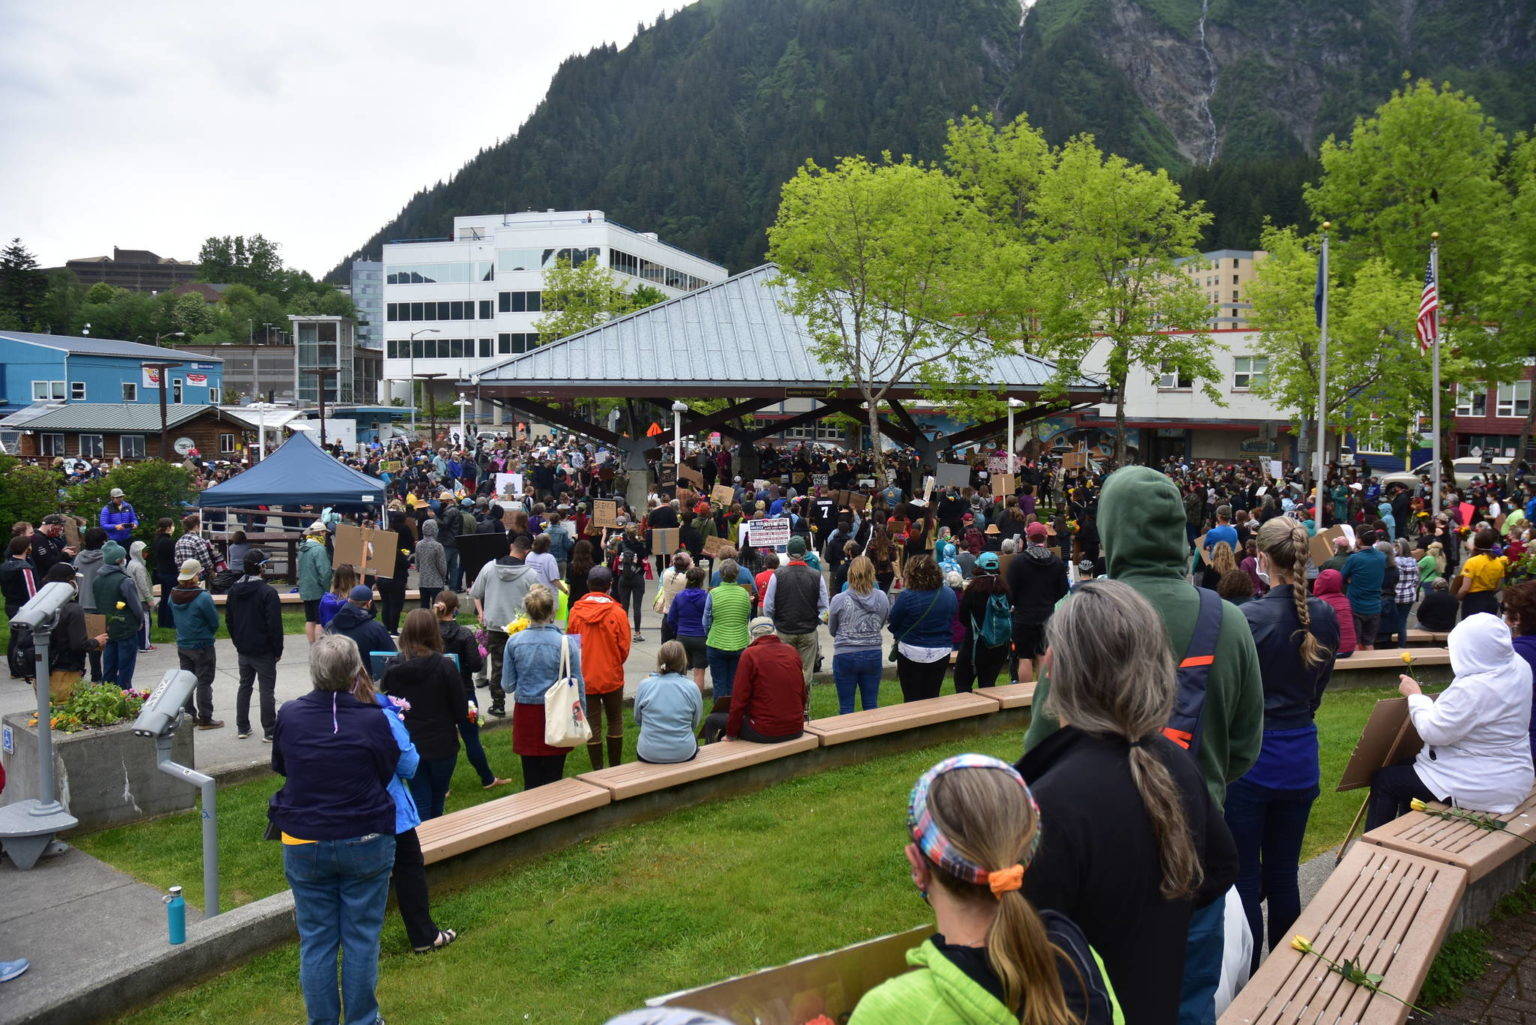 Hundreds gathered at Marine Park in downtown Juneau on June 7, 2020, for a rally and march calling for an end to police violence and systemic racism in America. Protesters issued a number of demands at the rally, and the City and Borough of Juneau has been trying to address some of those issues.(Peter Segall / Juneau Empire File)